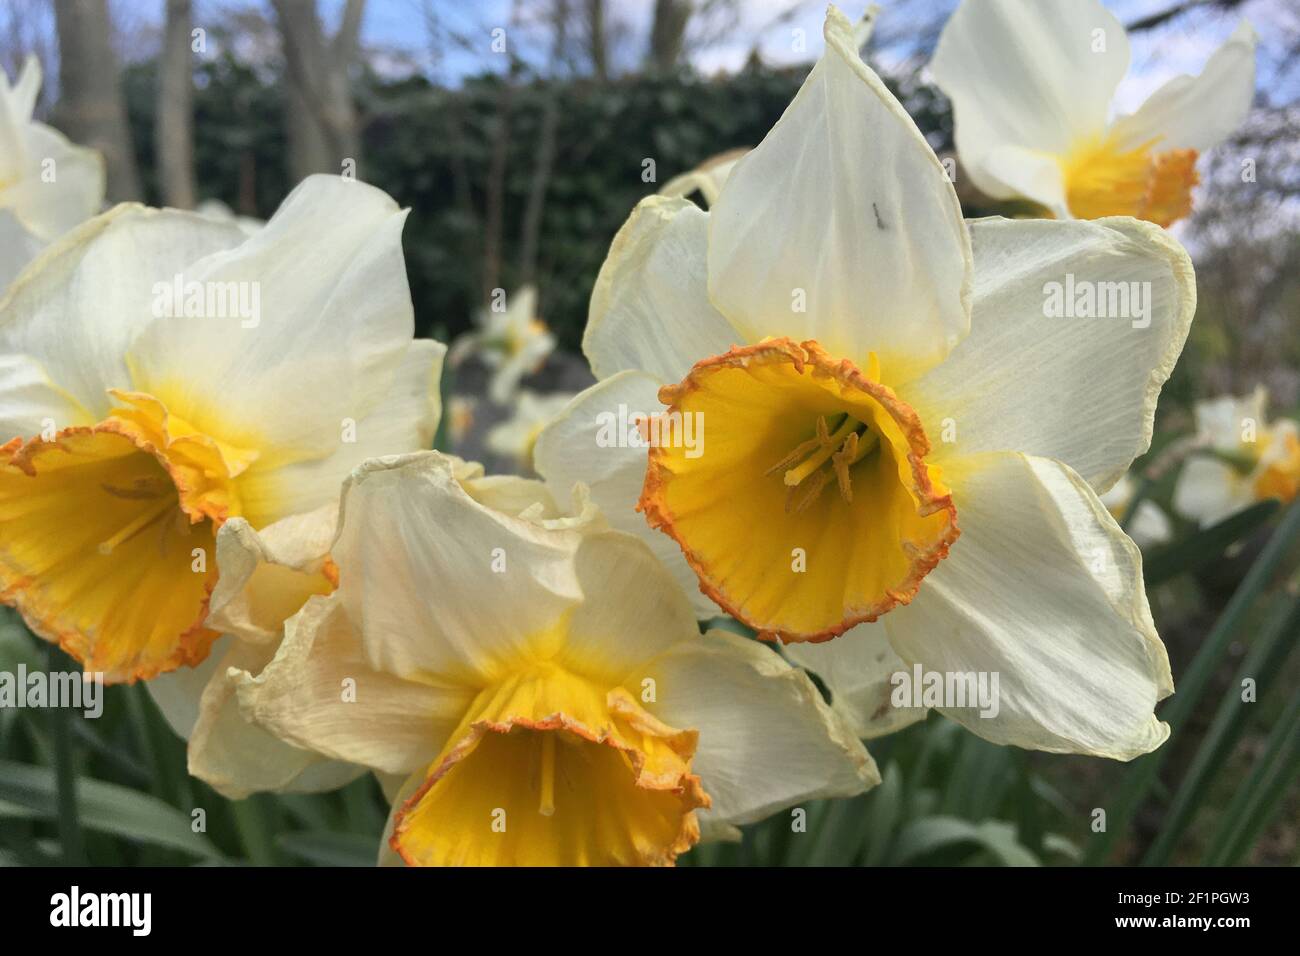 White and yellow Daffodils close up, London Stock Photo